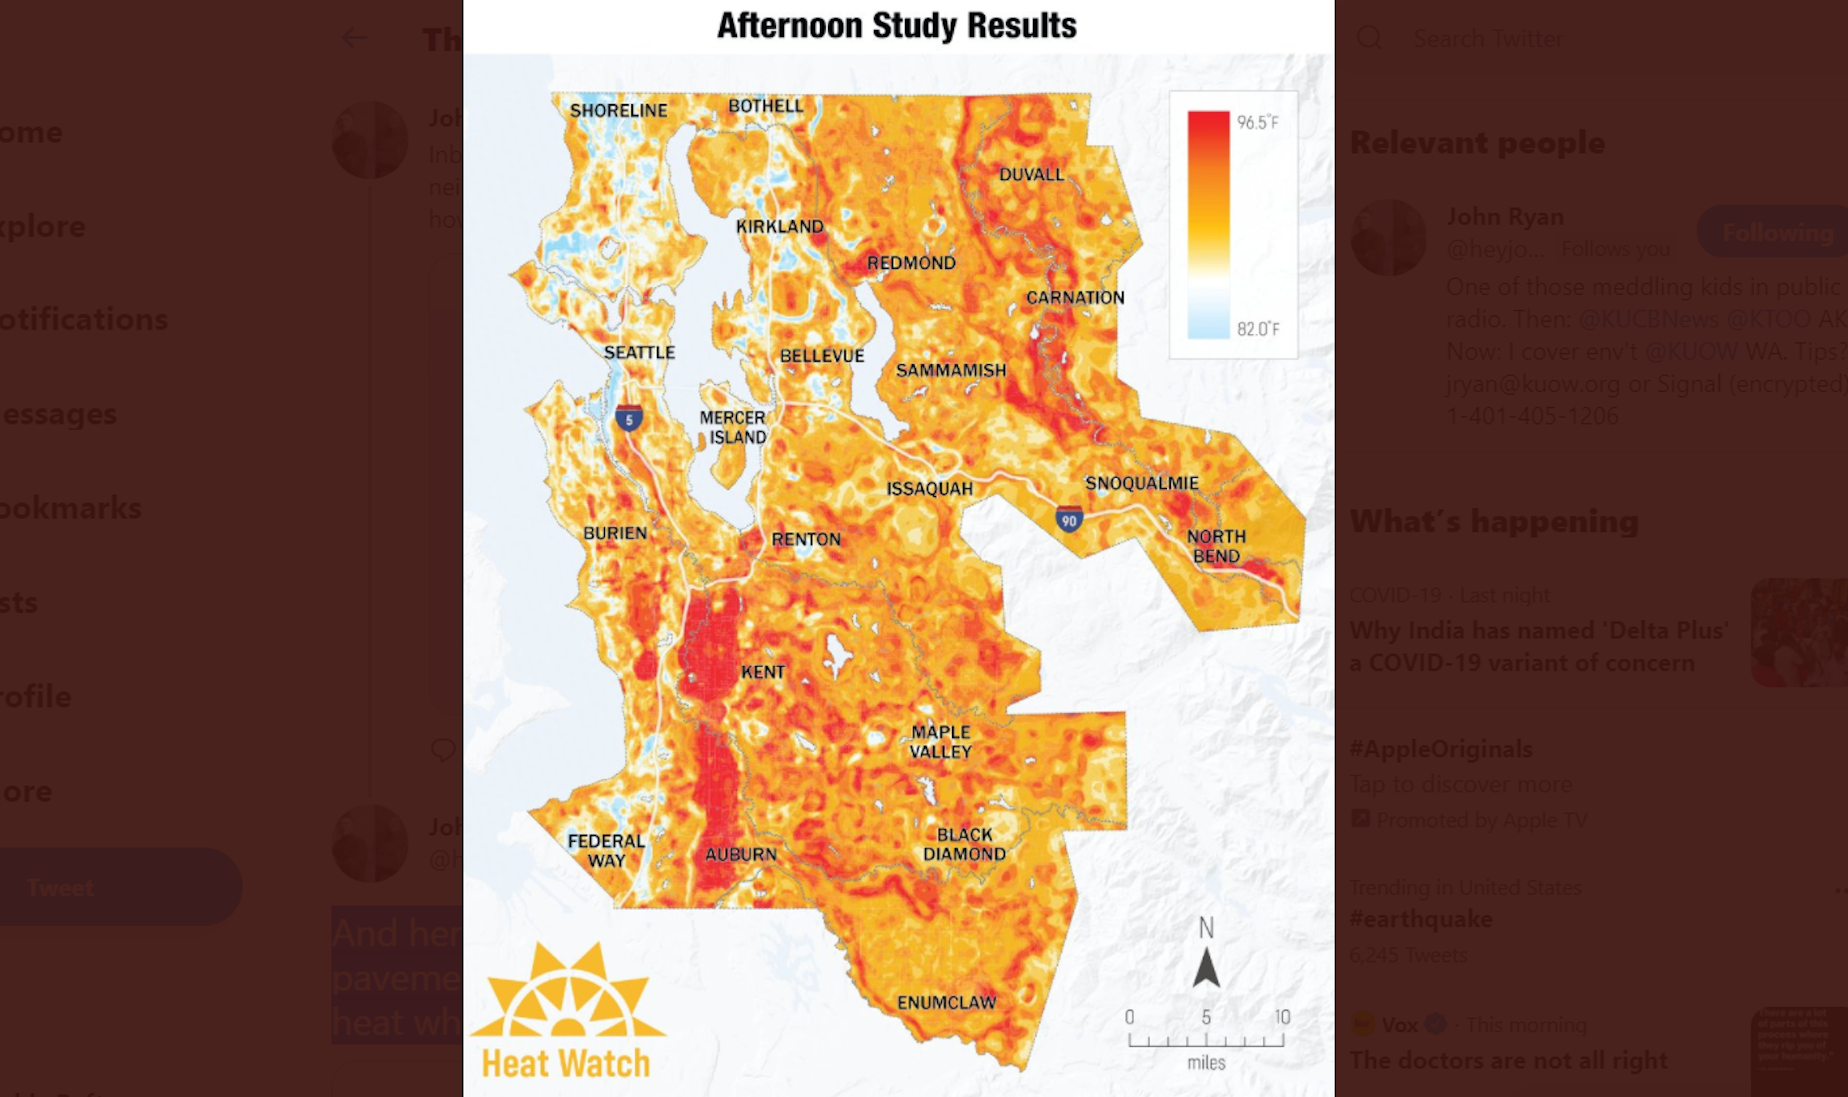 KUOW Heat wave could hit Seattle area neighborhoods differently